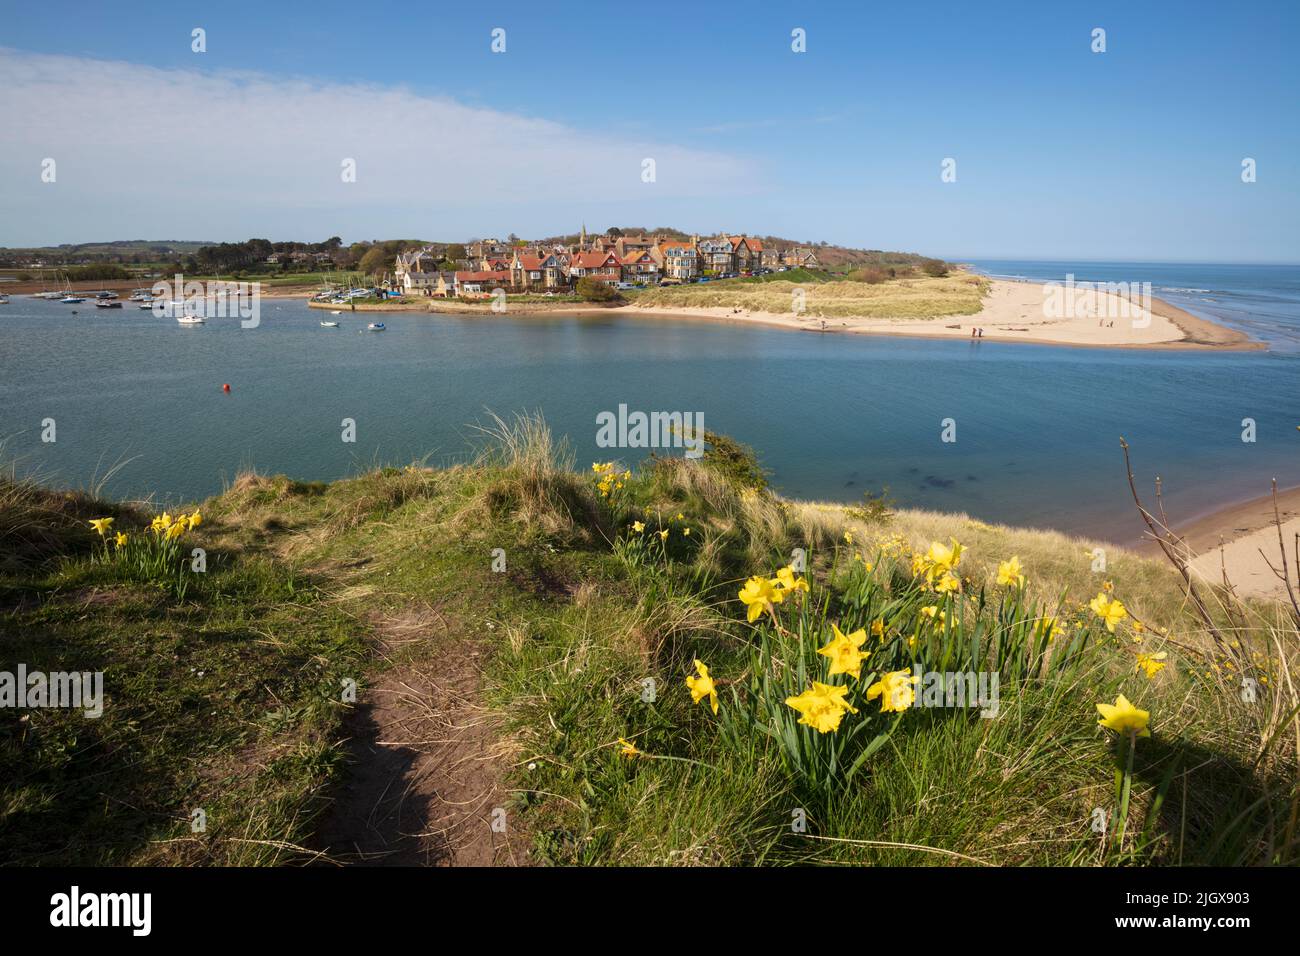 View of Alnmouth and Alnmouth Beach at high tide with spring daffodils, Alnmouth, Northumberland, England, United Kingdom, Europe Stock Photo